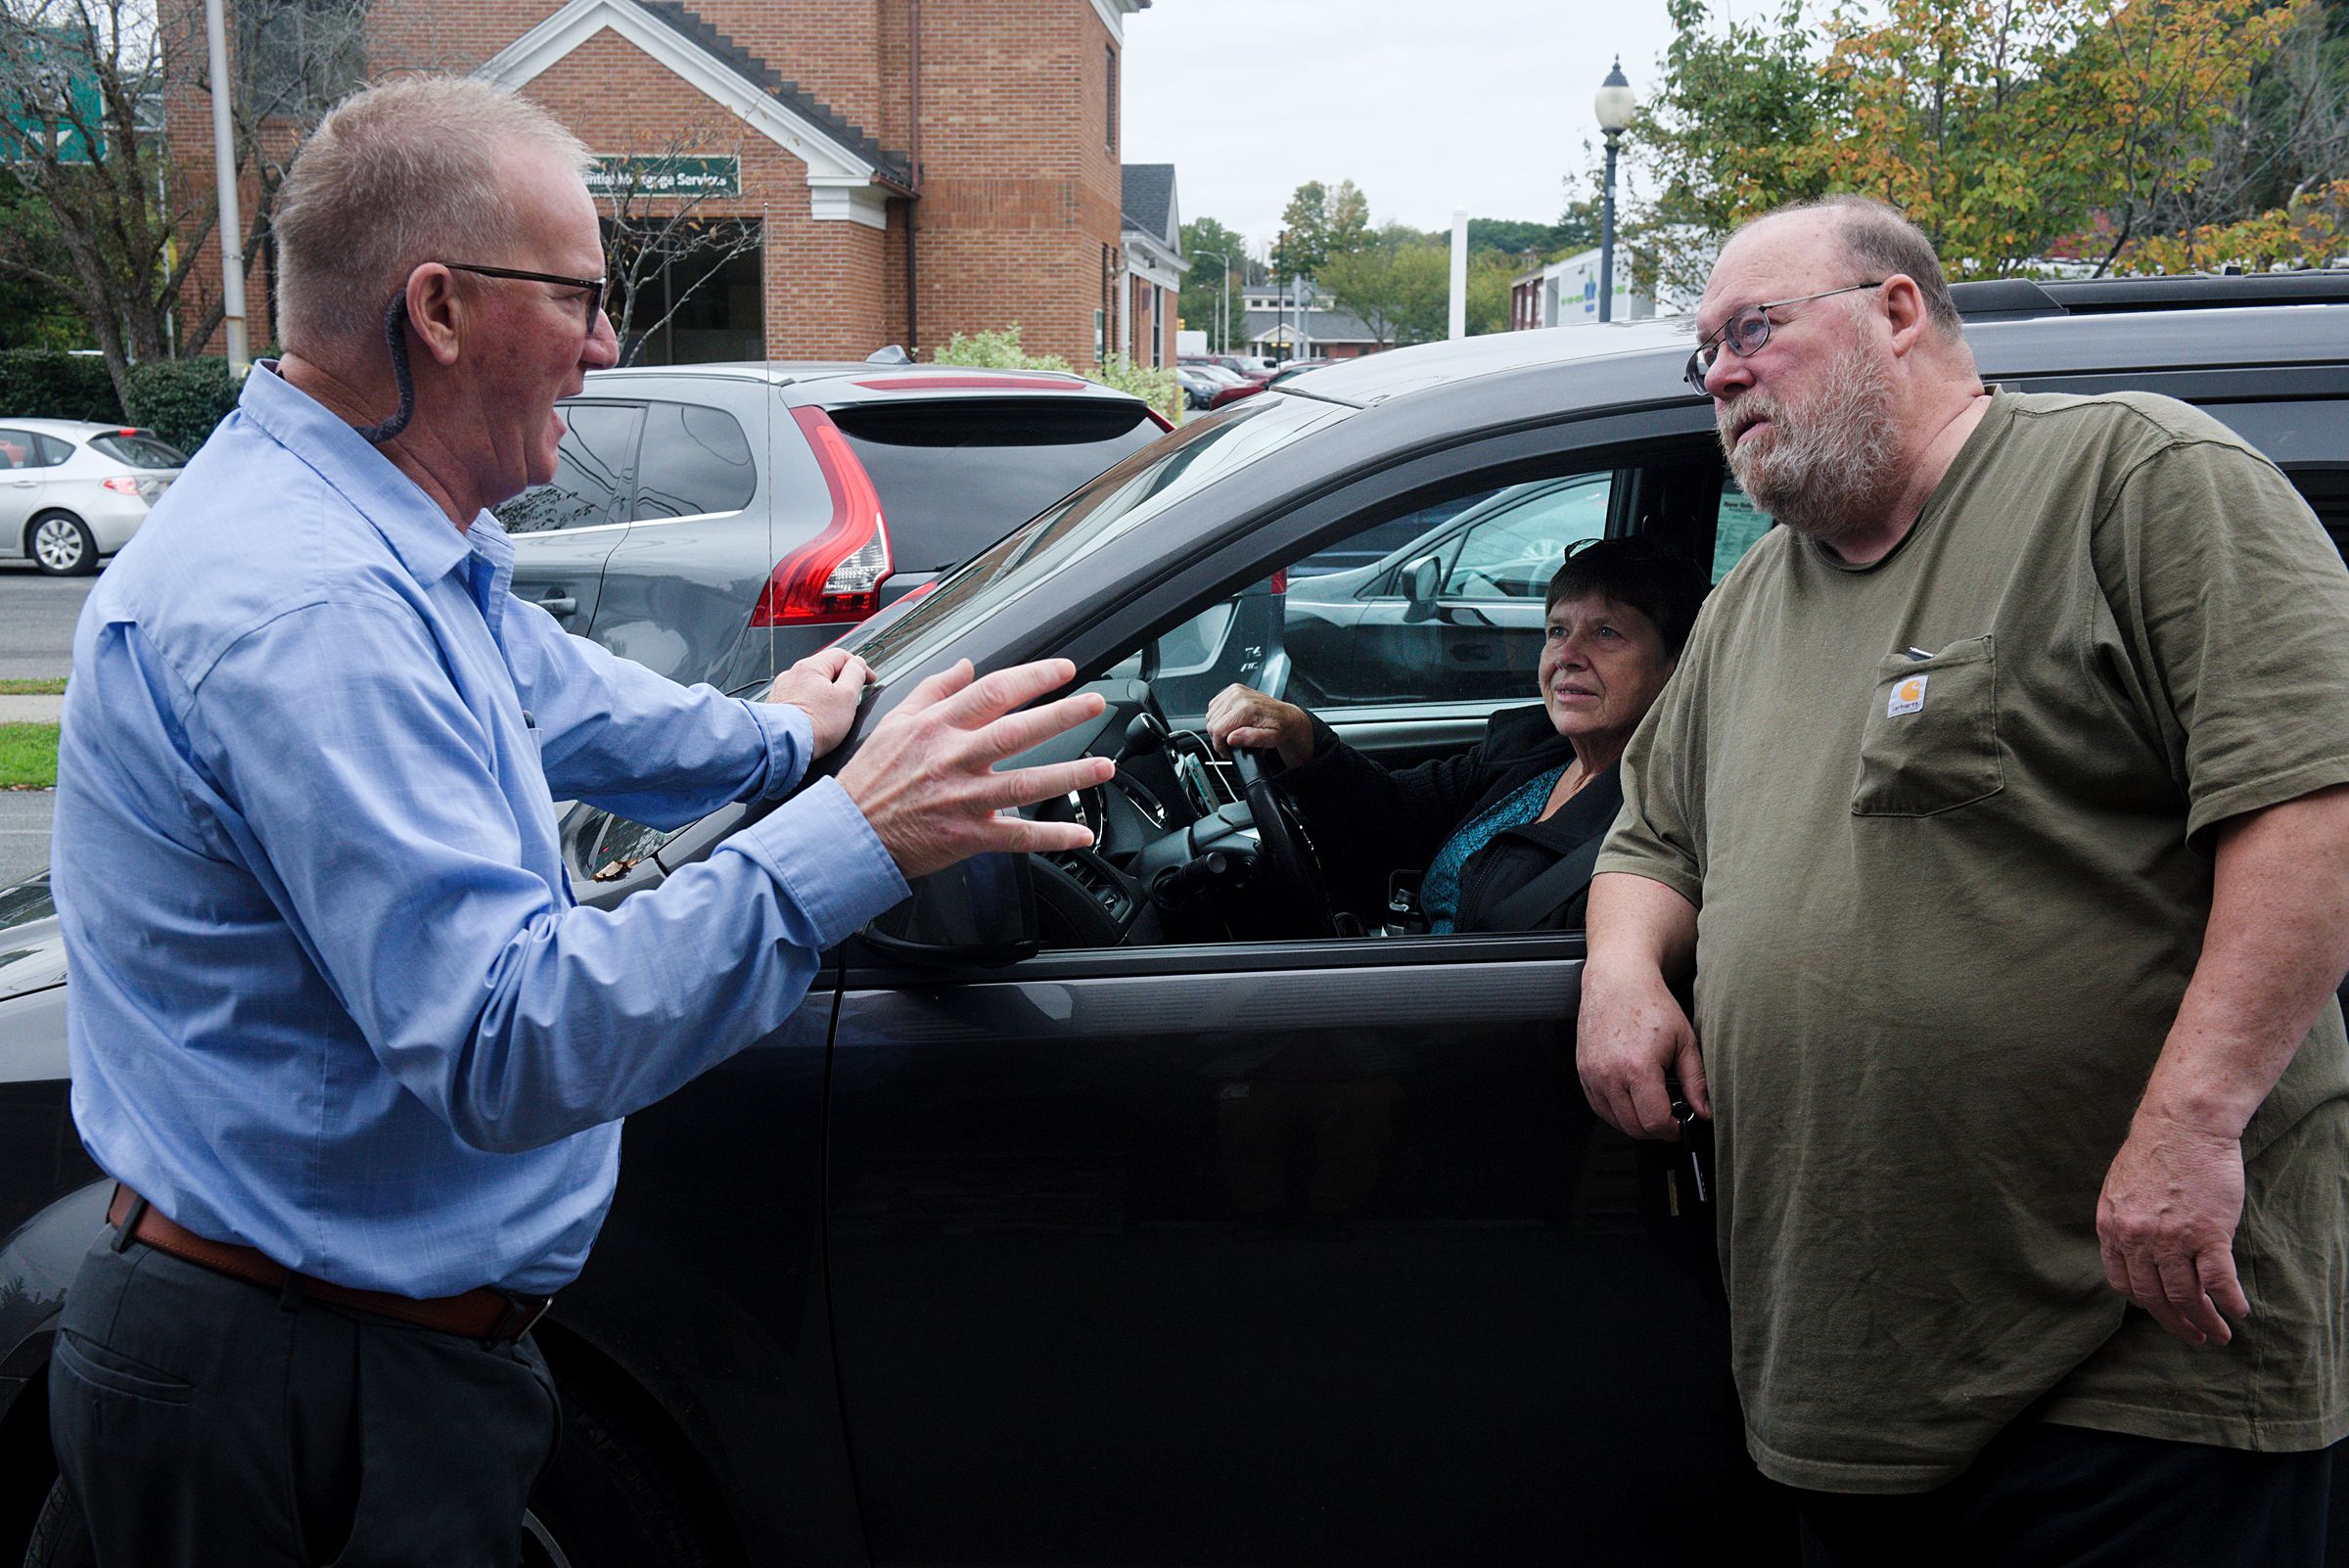 Brad Gilman, left, talks with Joan Smith, of Norwich, middle, and her partner Lincoln Robtoy, right, after handing over the key to a truck they bought at Upper Valley Auto Mart, where Gilman is general manager in White River Junction, Vt., on Monday, Oct. 4, 2021. Smith and Robtoy have purchased their last two vehicles from the used auto dealer. (Valley News - James M. Patterson) Copyright Valley News. May not be reprinted or used online without permission. Send requests to permission@vnews.com.